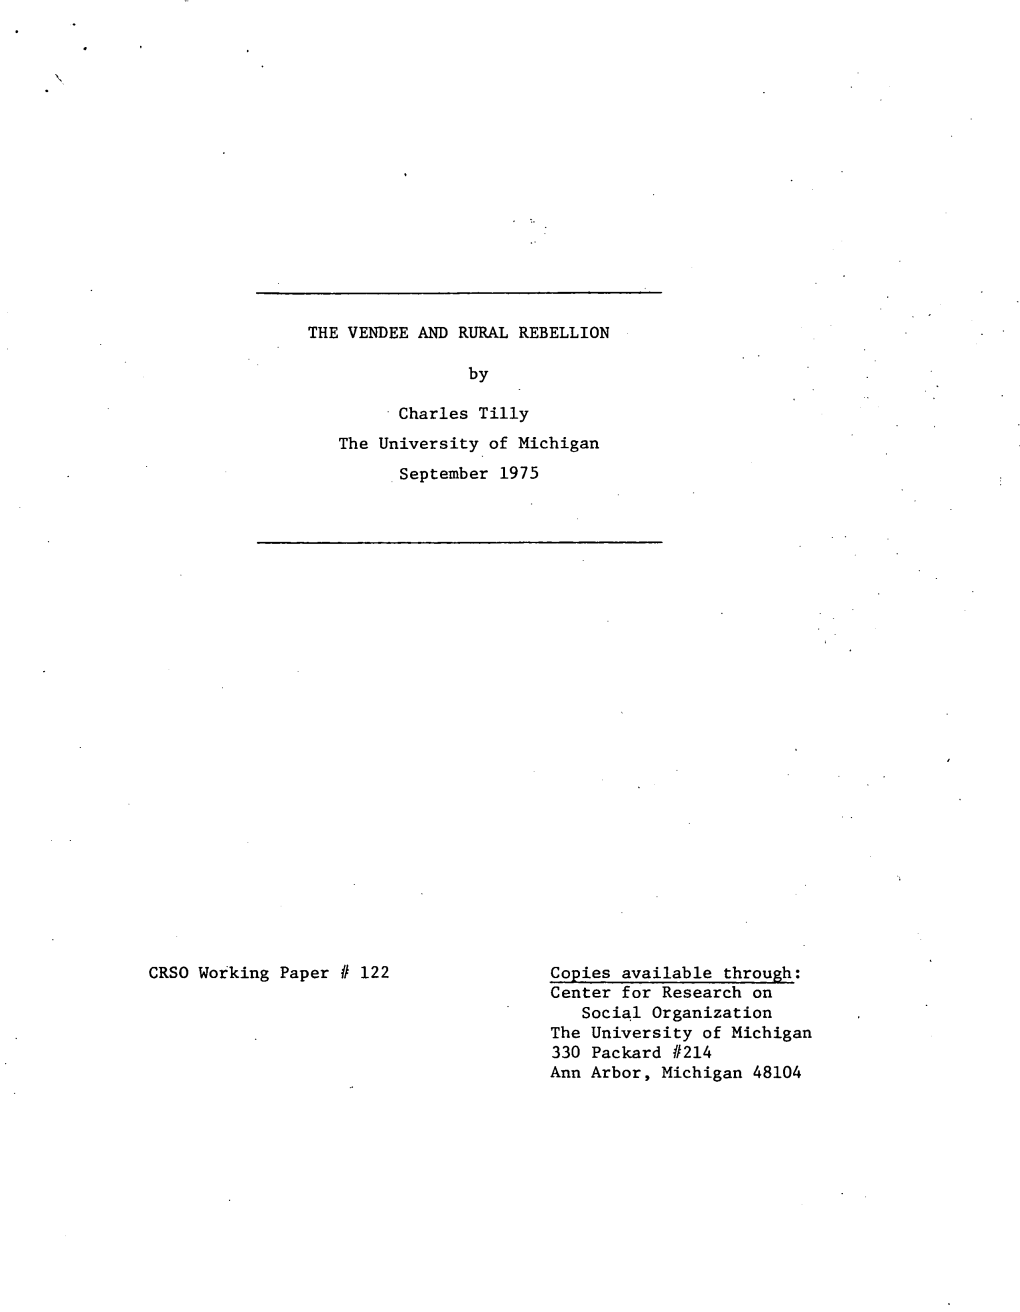 THE VENDEE and RURAL REBELLION Charles Tilly the University of Michigan September 1975 CRSO Working Paper # 122 Copies Available